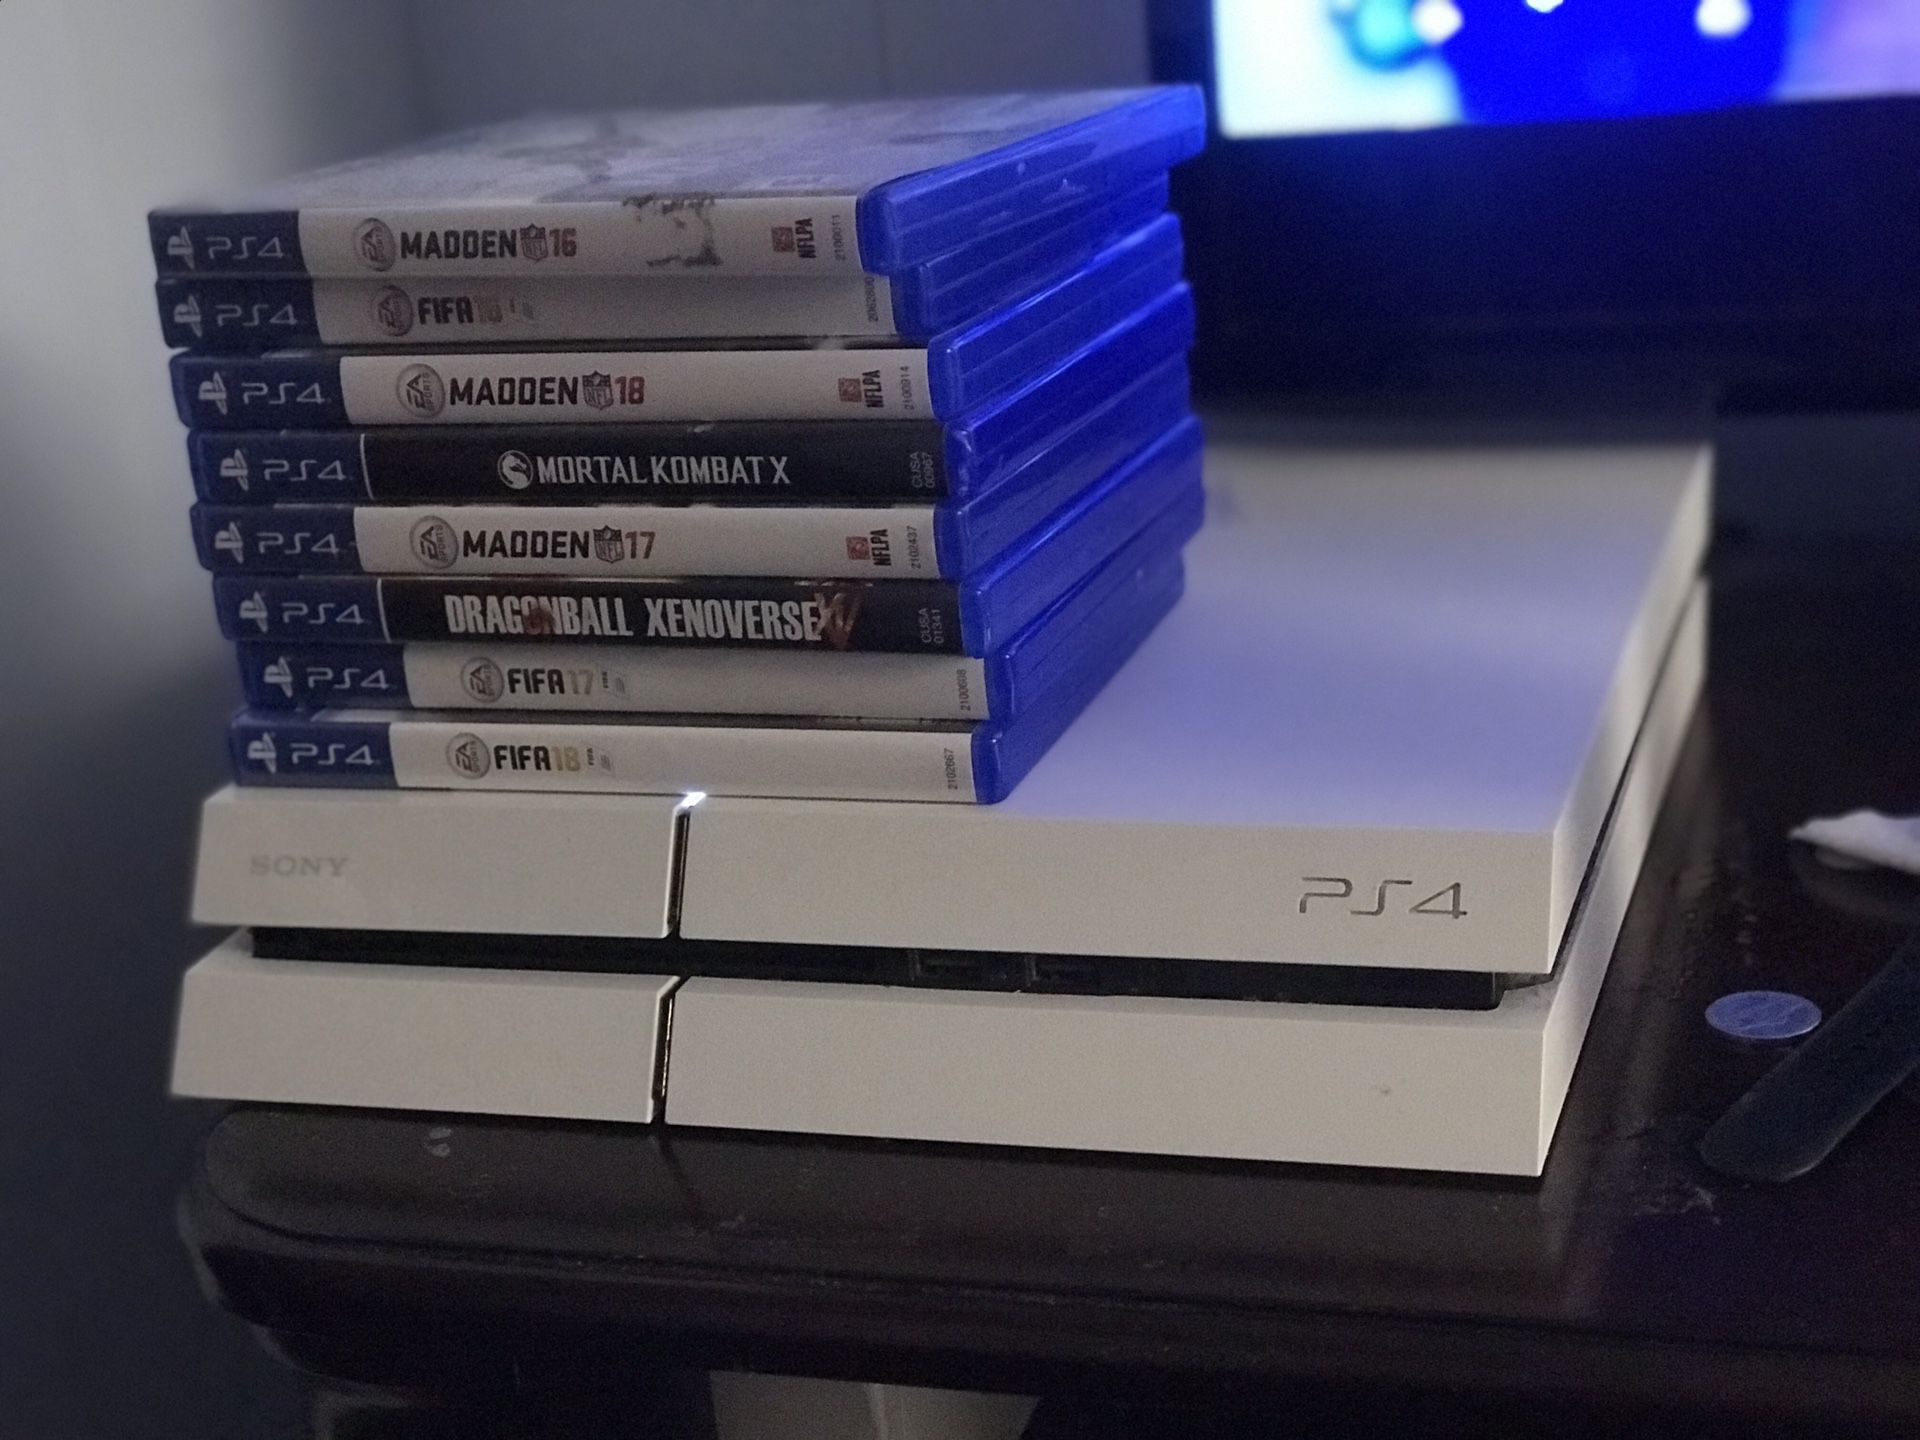 PS4 for sale 500 gbs